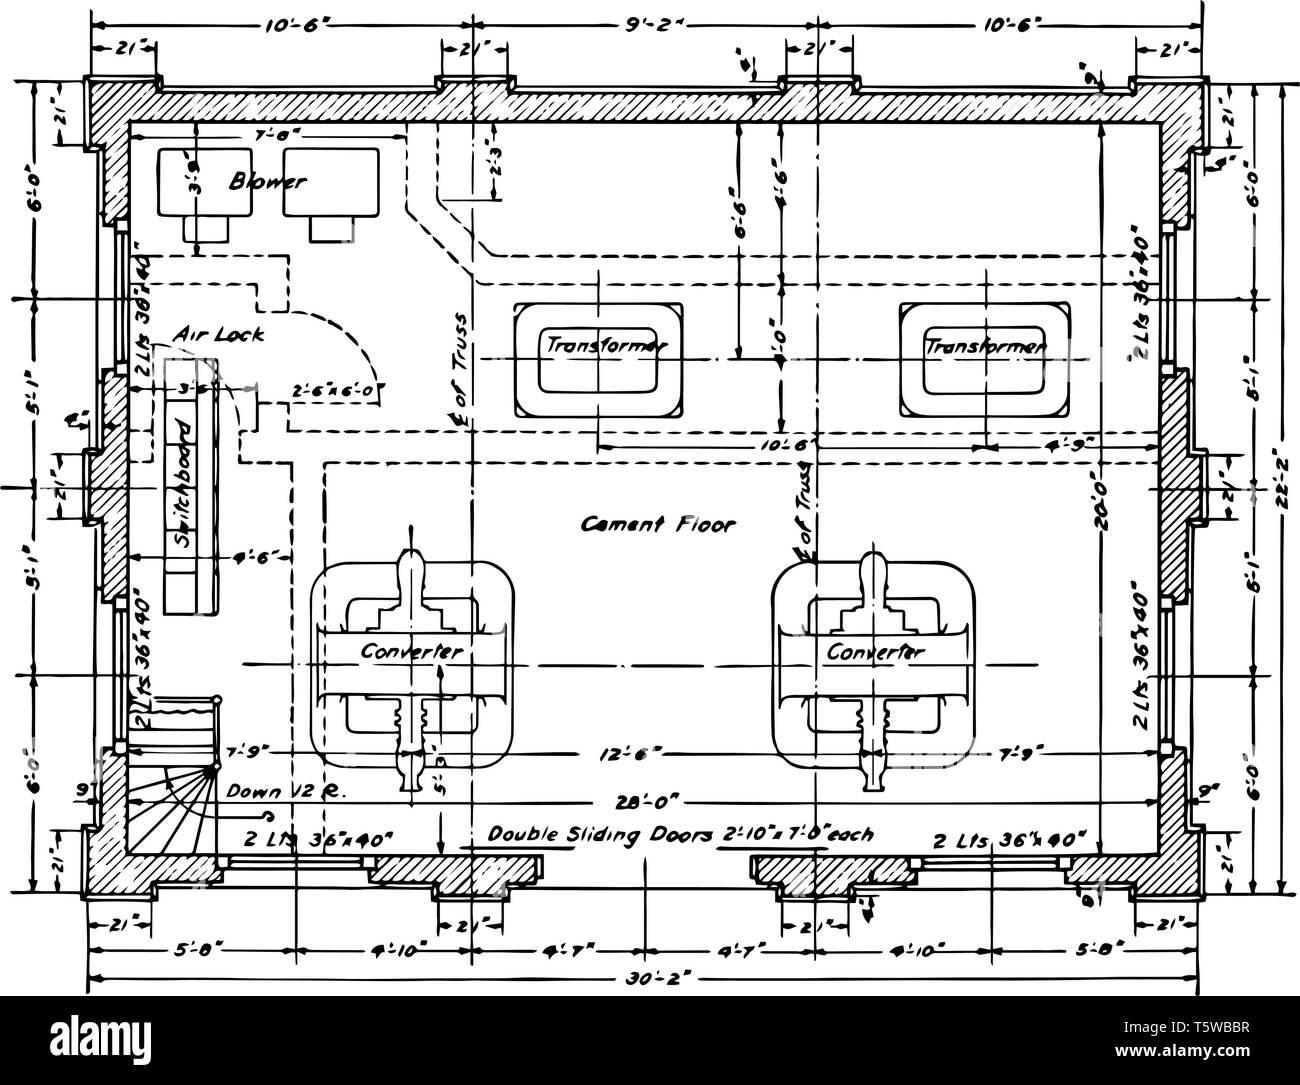 Substation Floor Residence Plan is showing the engineering structure it is a typical residence building vintage line drawing or engraving. Stock Vector